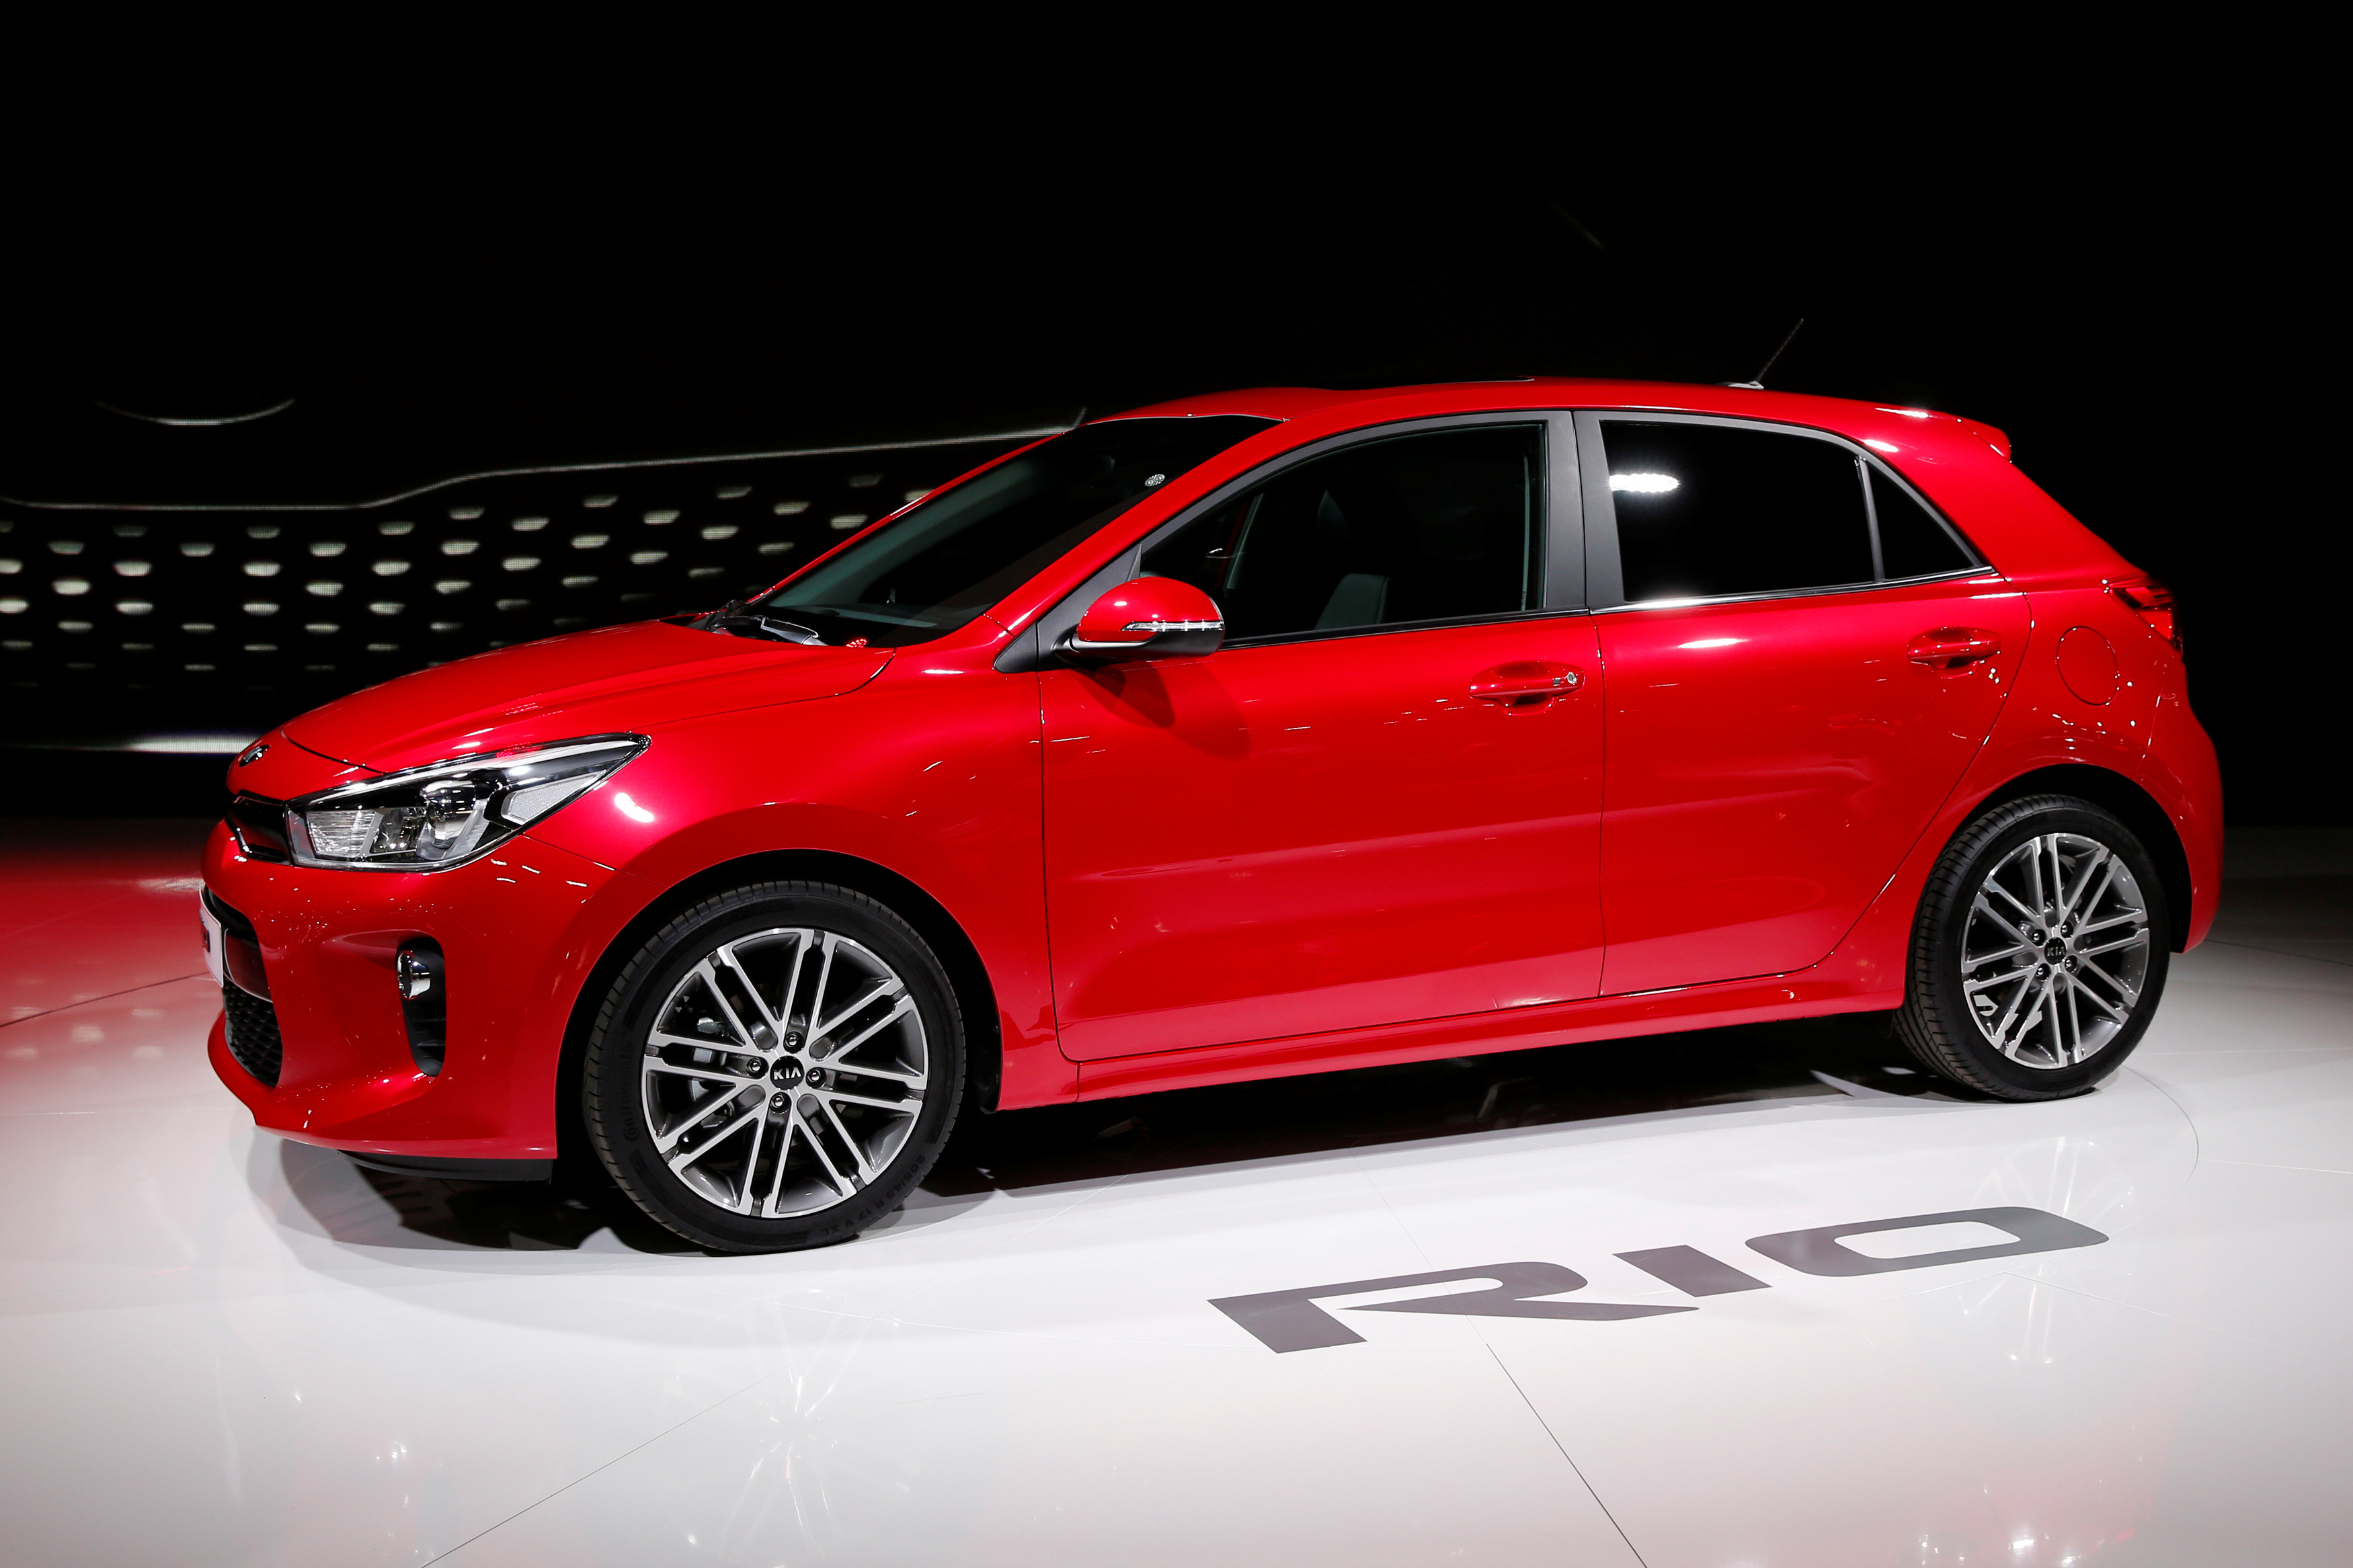 The Kia Rio is displayed on media day at the Paris auto show